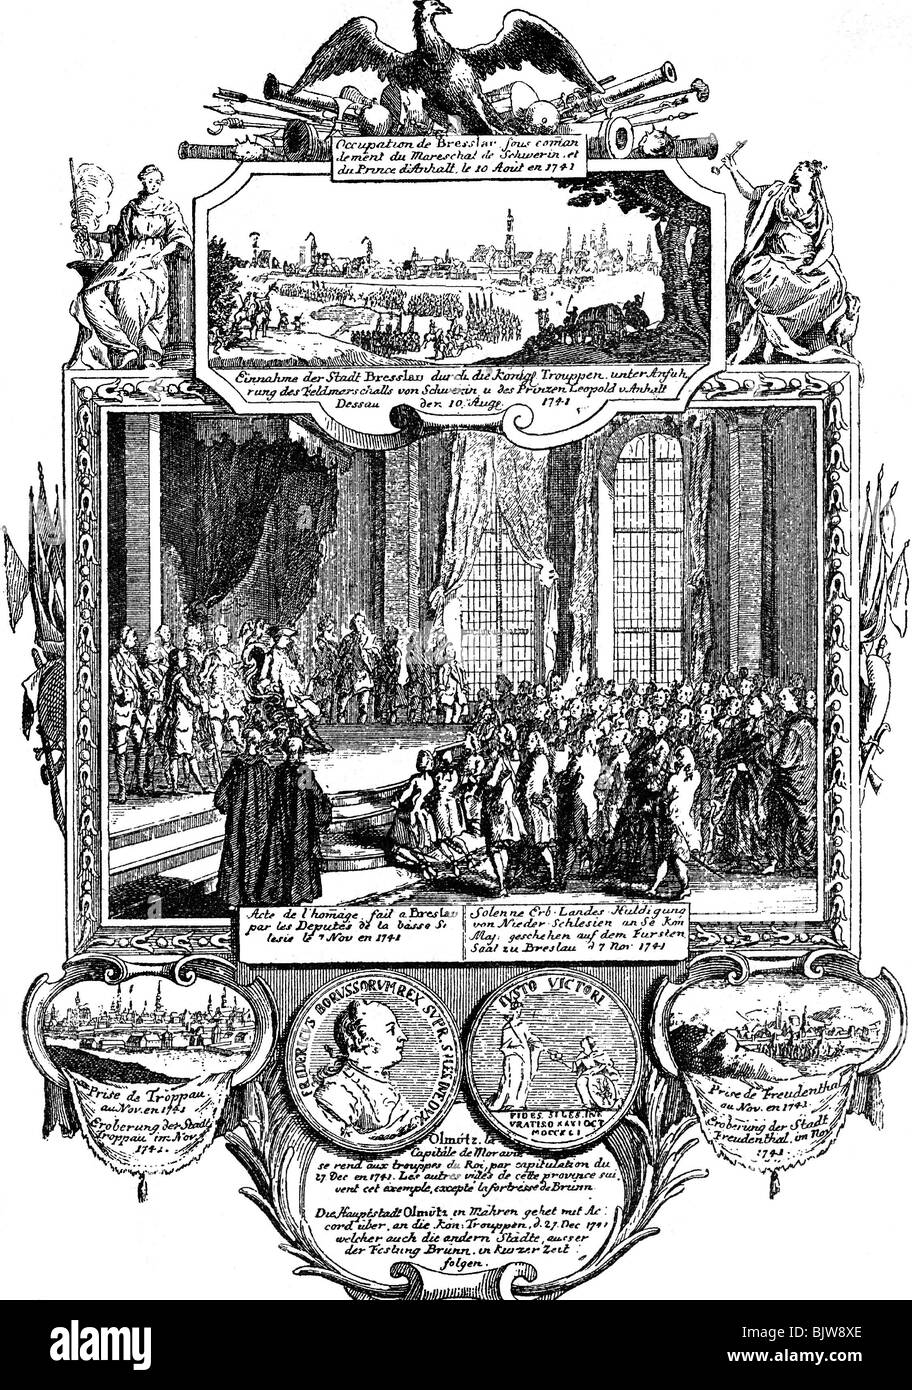 events, War of the Austrian Succession 1740 - 1748, memorial page on the occupation of Silesia, 1742, contemporary copper engraving, , Stock Photo